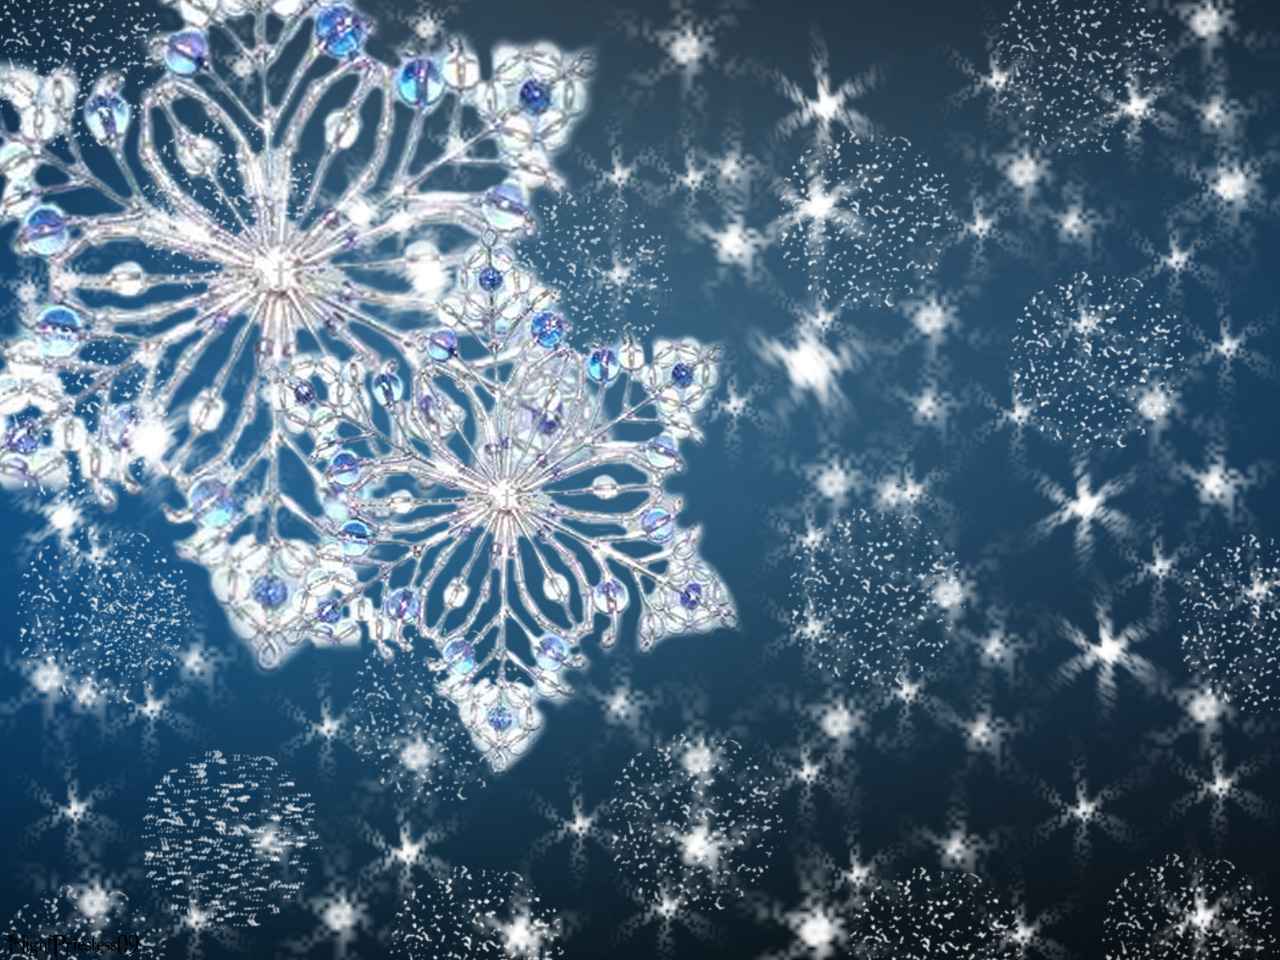 Snowy Winter Flakes Background by NightPriestess09 on